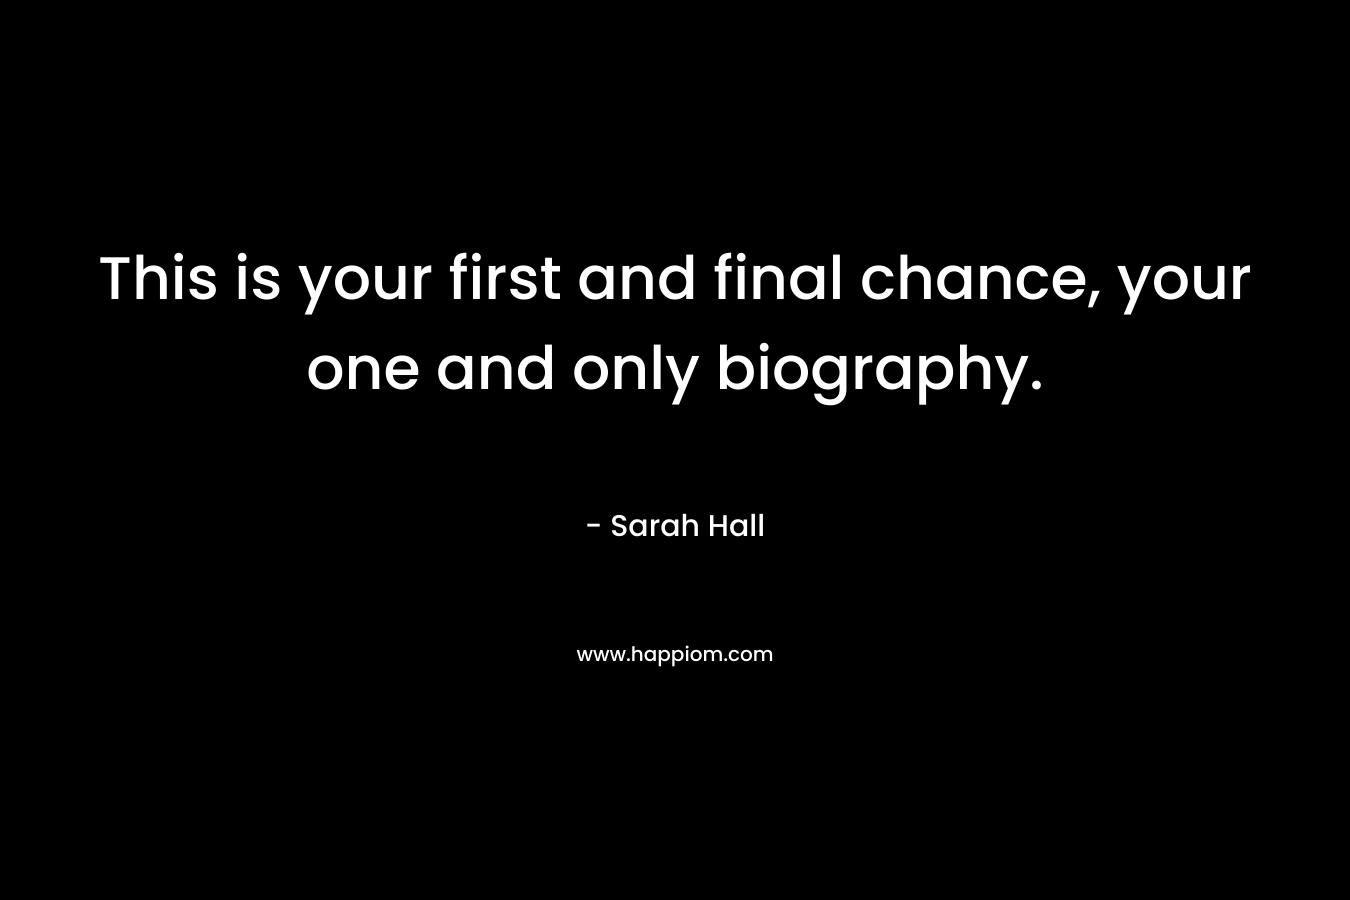 This is your first and final chance, your one and only biography. – Sarah Hall